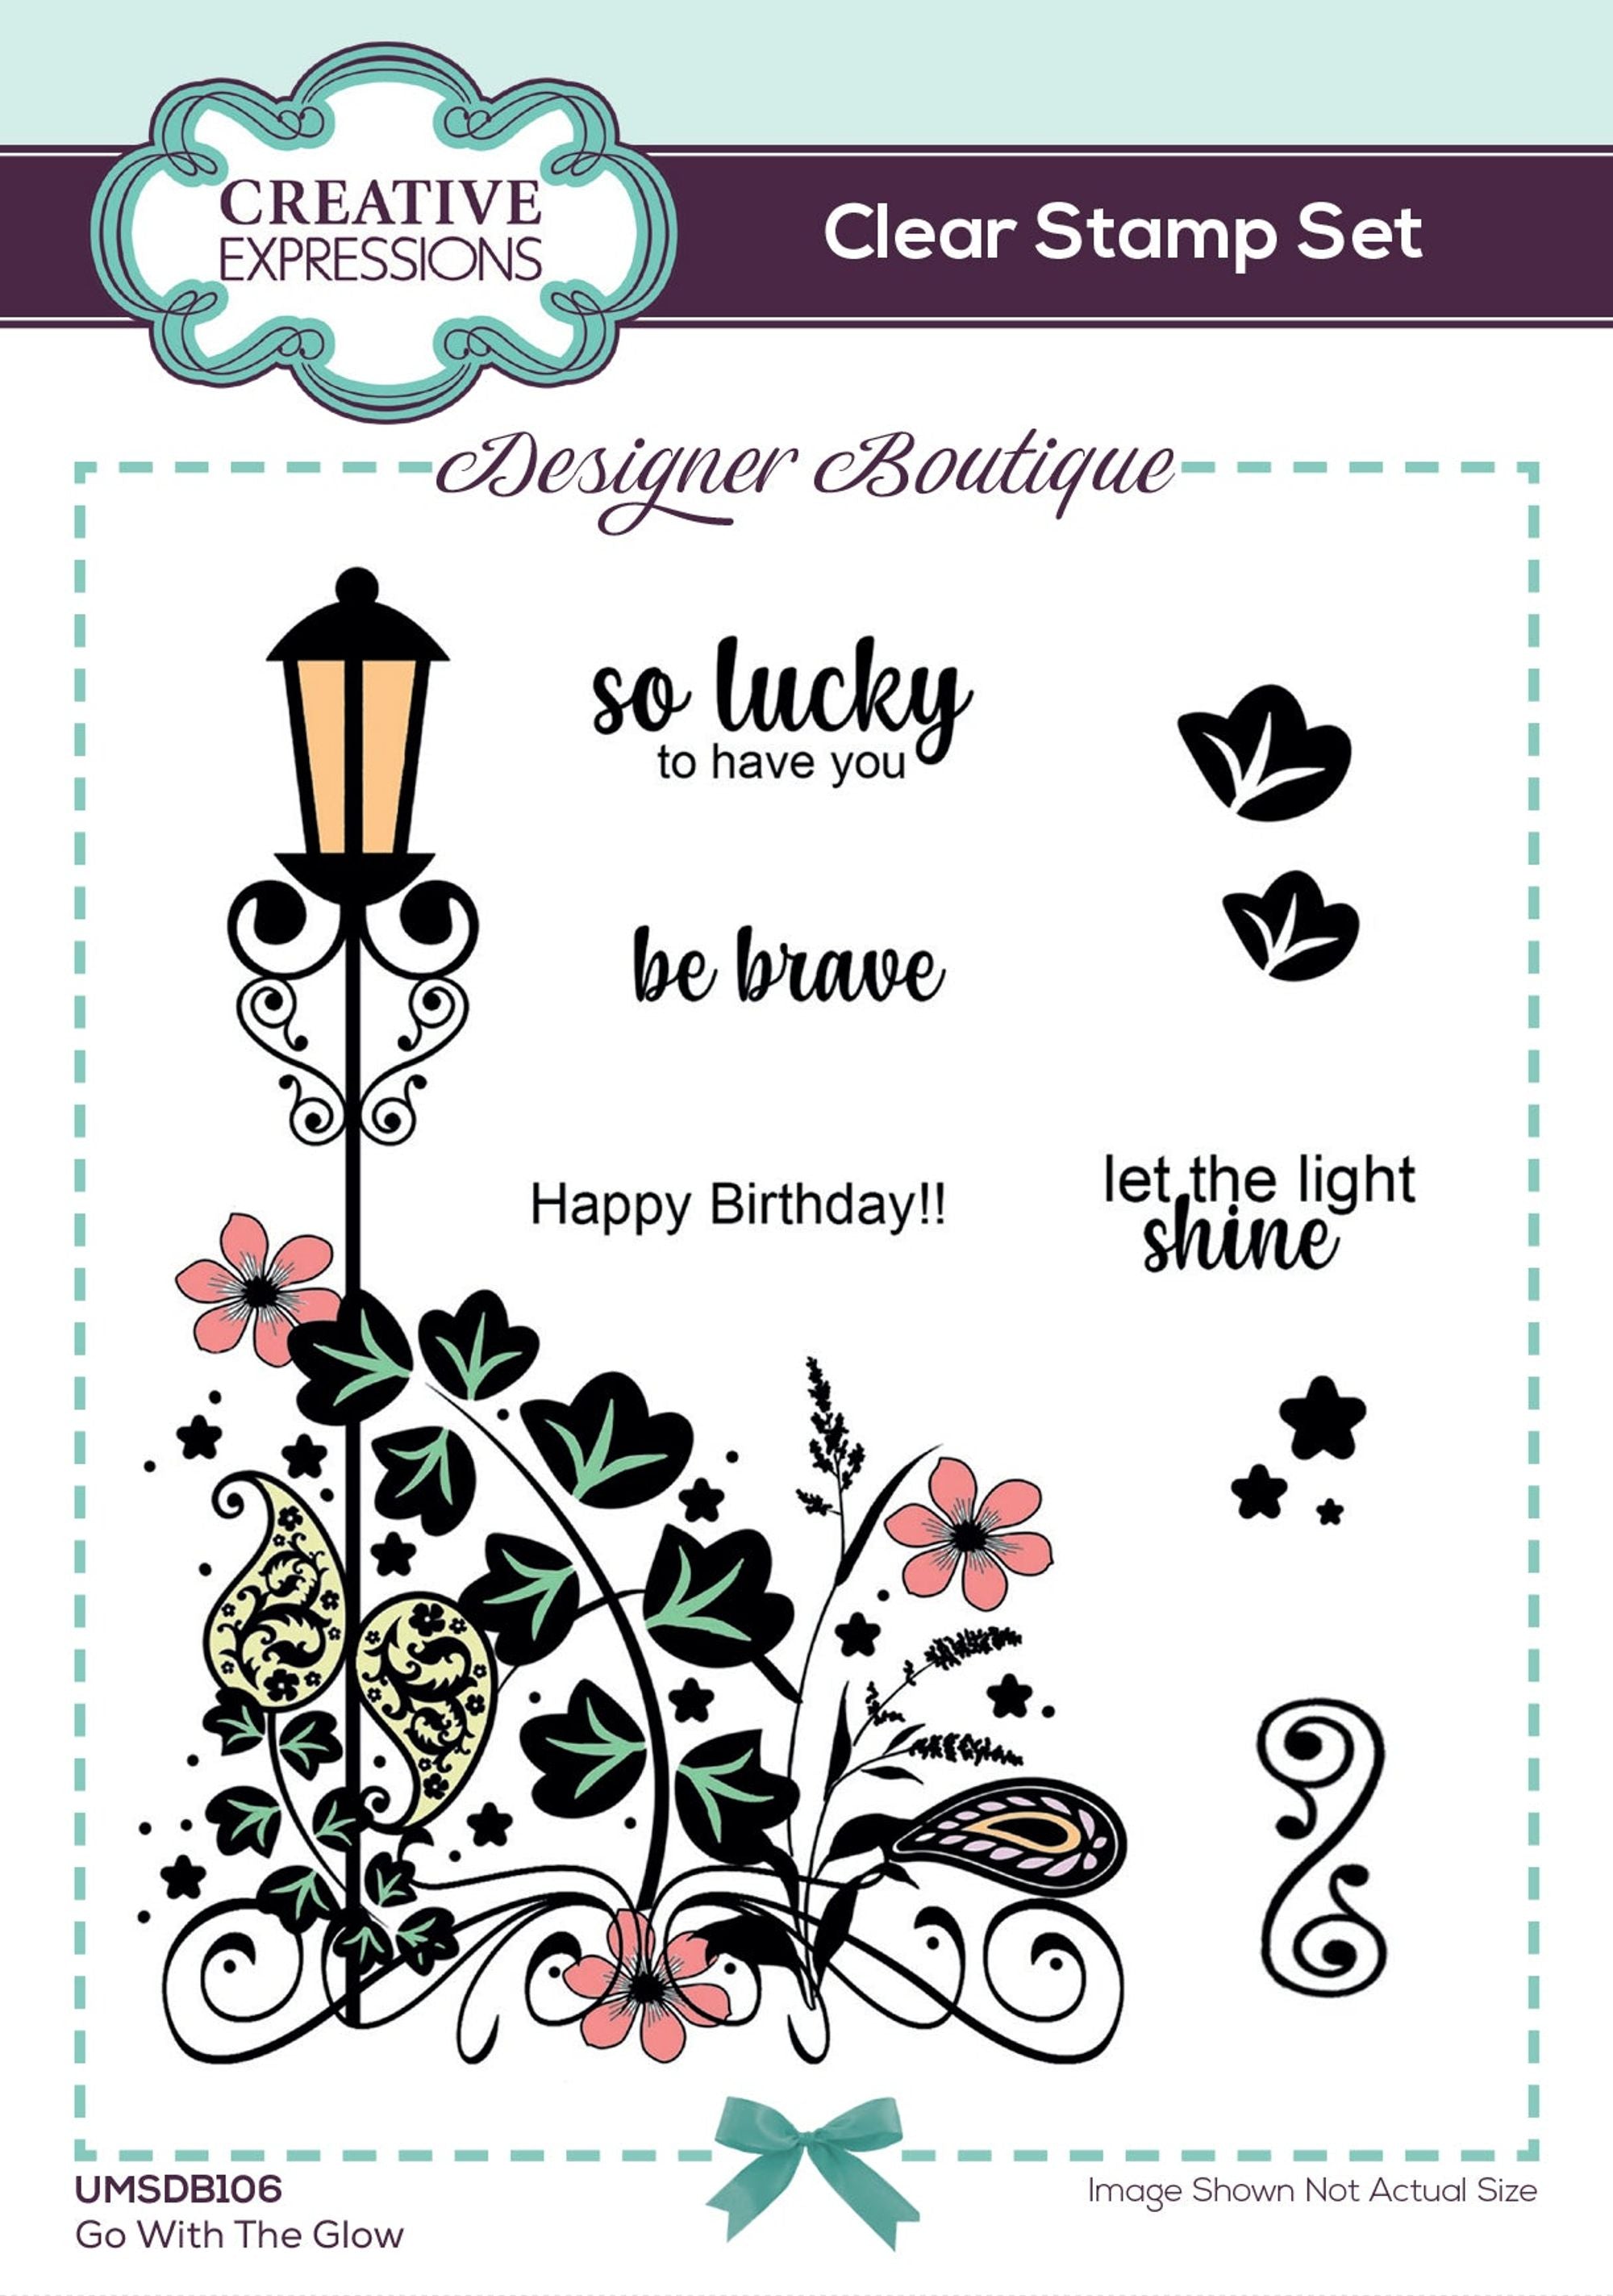 Creative Expressions Designer Boutique Go With The Glow 6 in x 4 in Clear Stamp Set